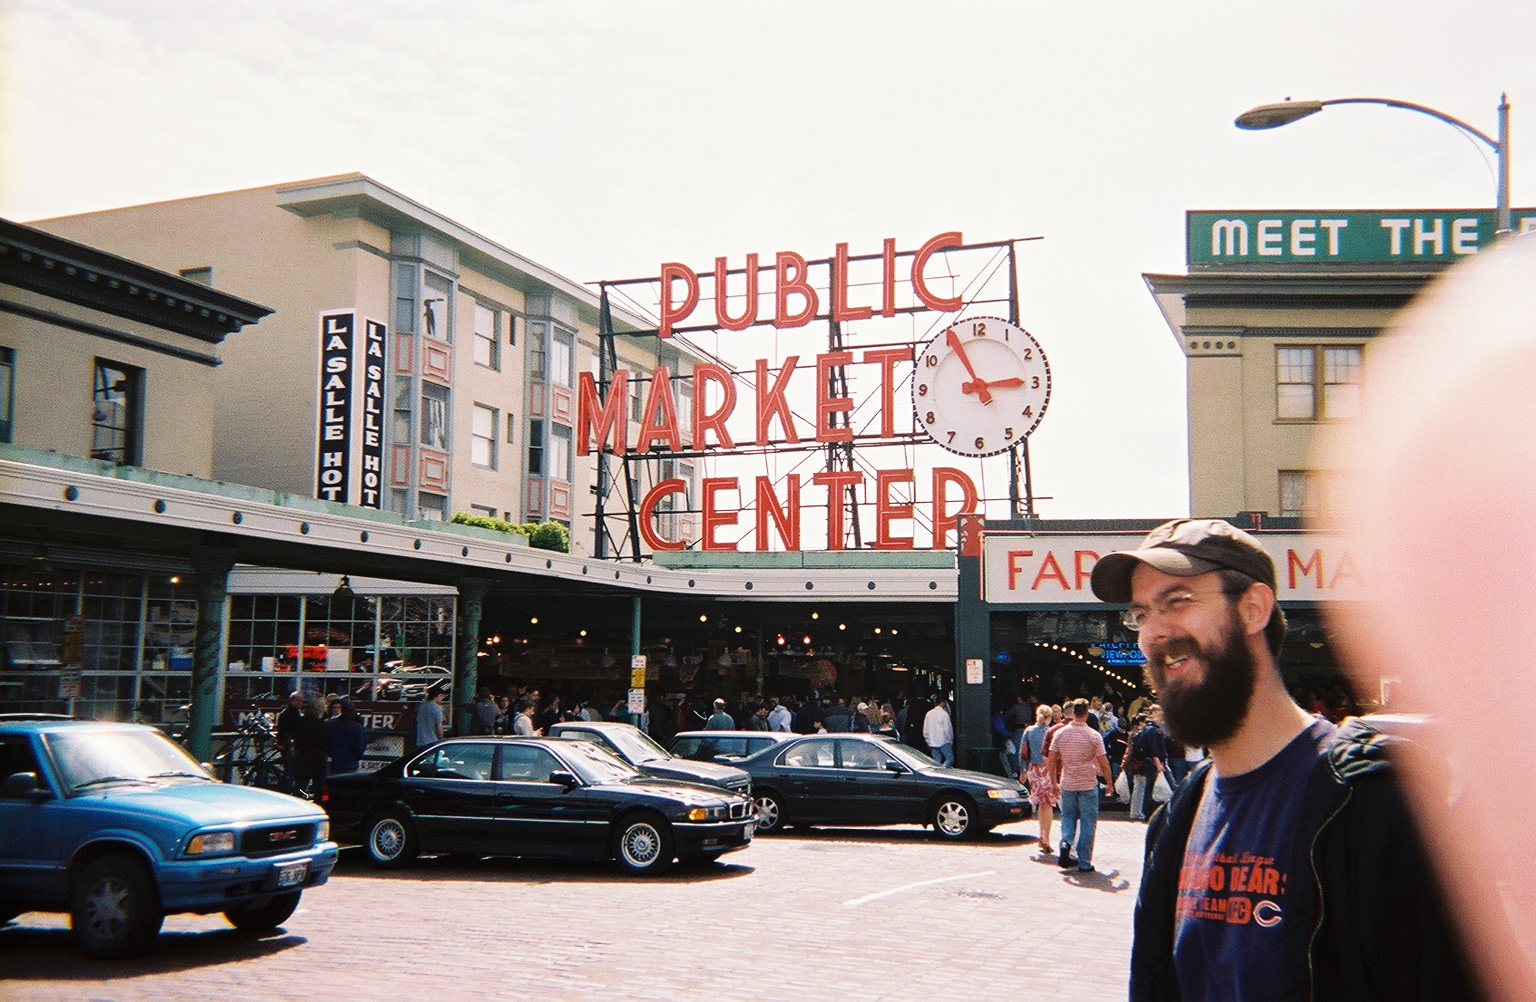 A man with a beard smiles in front of Seattle's Public Market Center